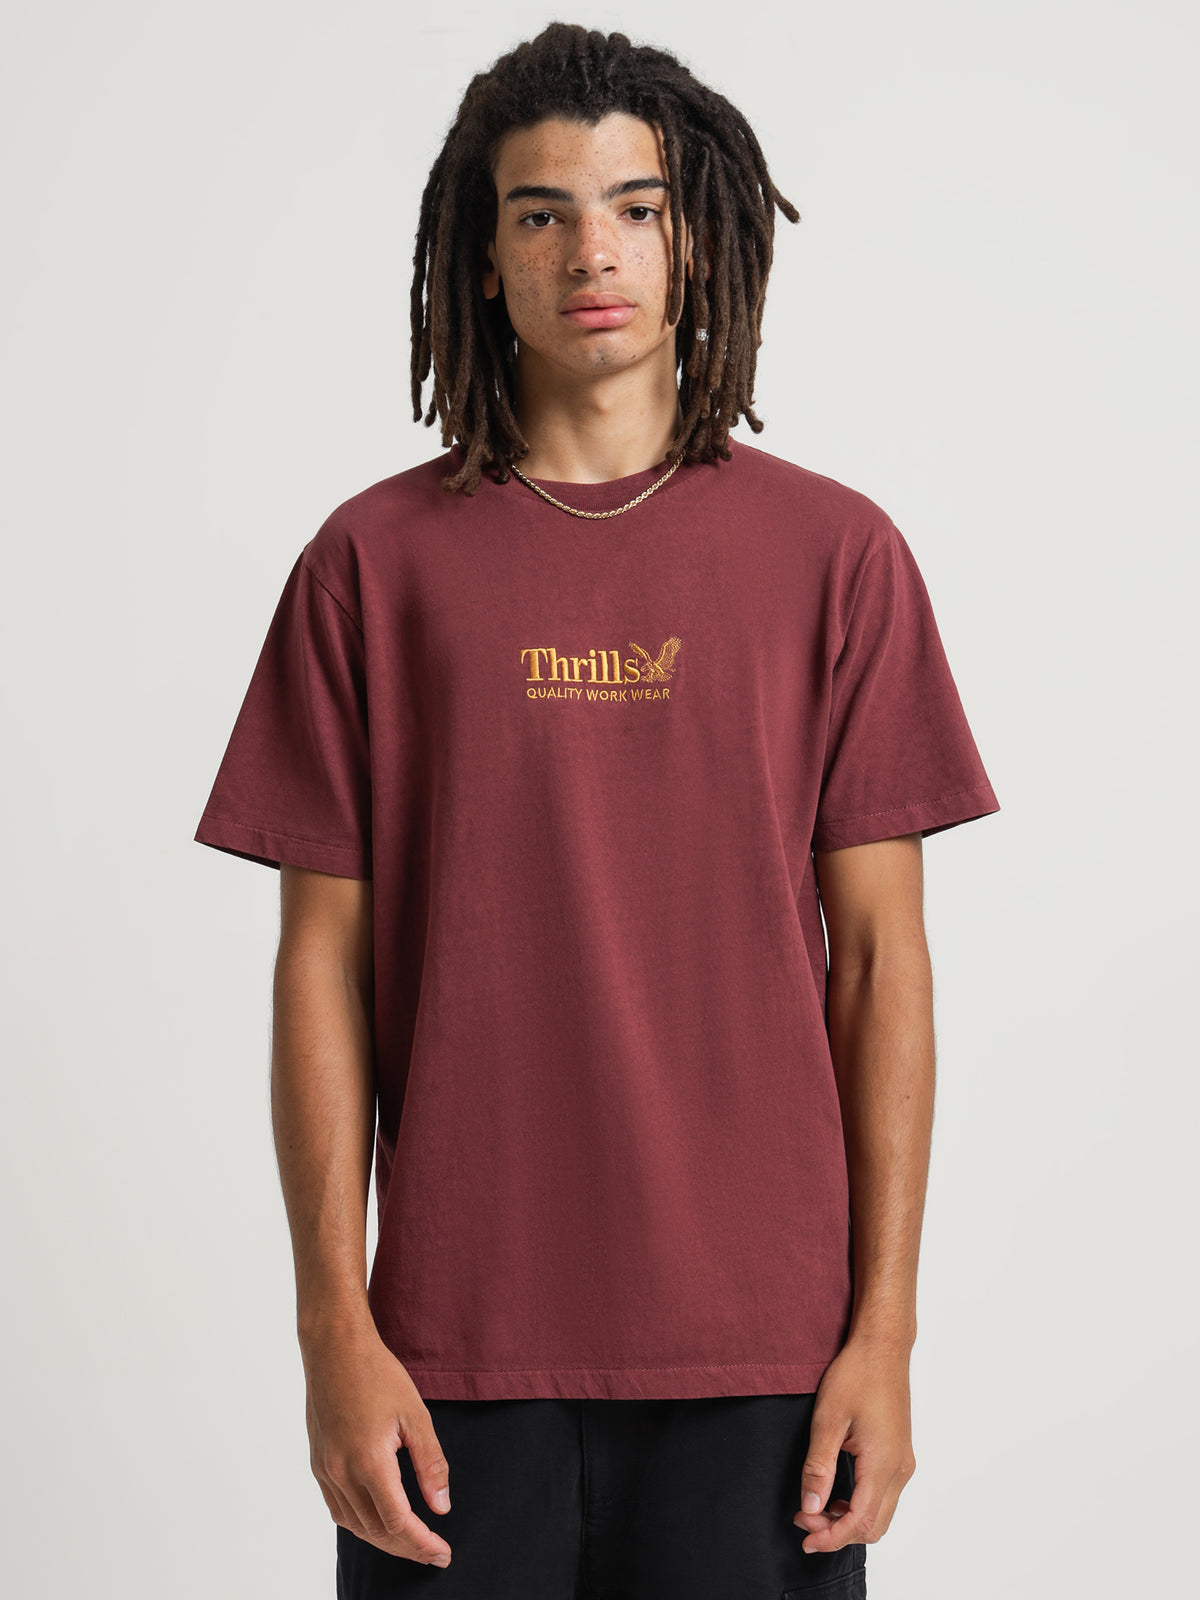 Union Merch Fit T-Shirt in Port